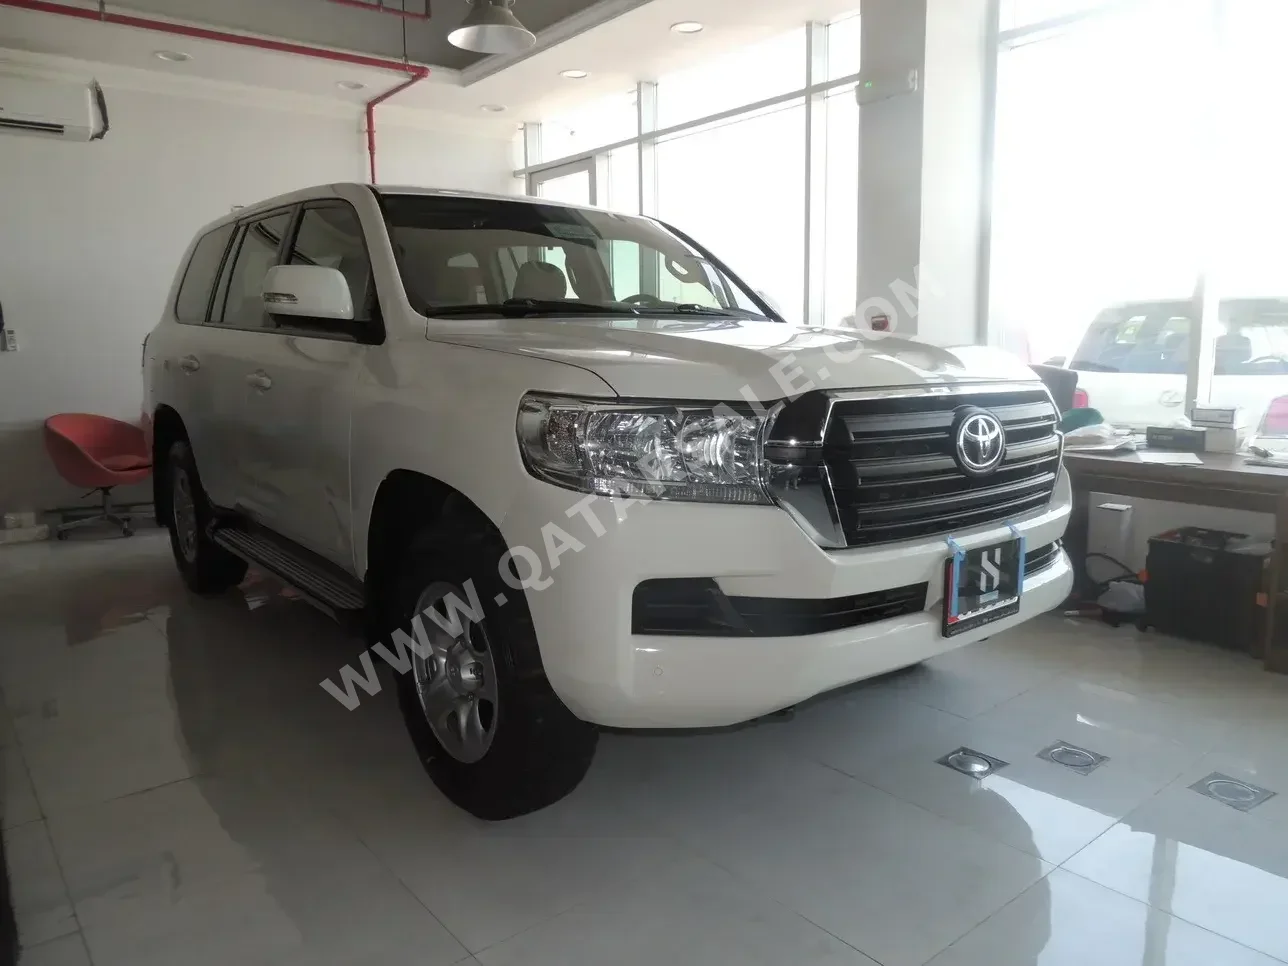 Toyota  Land Cruiser  G  2021  Automatic  66,600 Km  6 Cylinder  Four Wheel Drive (4WD)  SUV  White